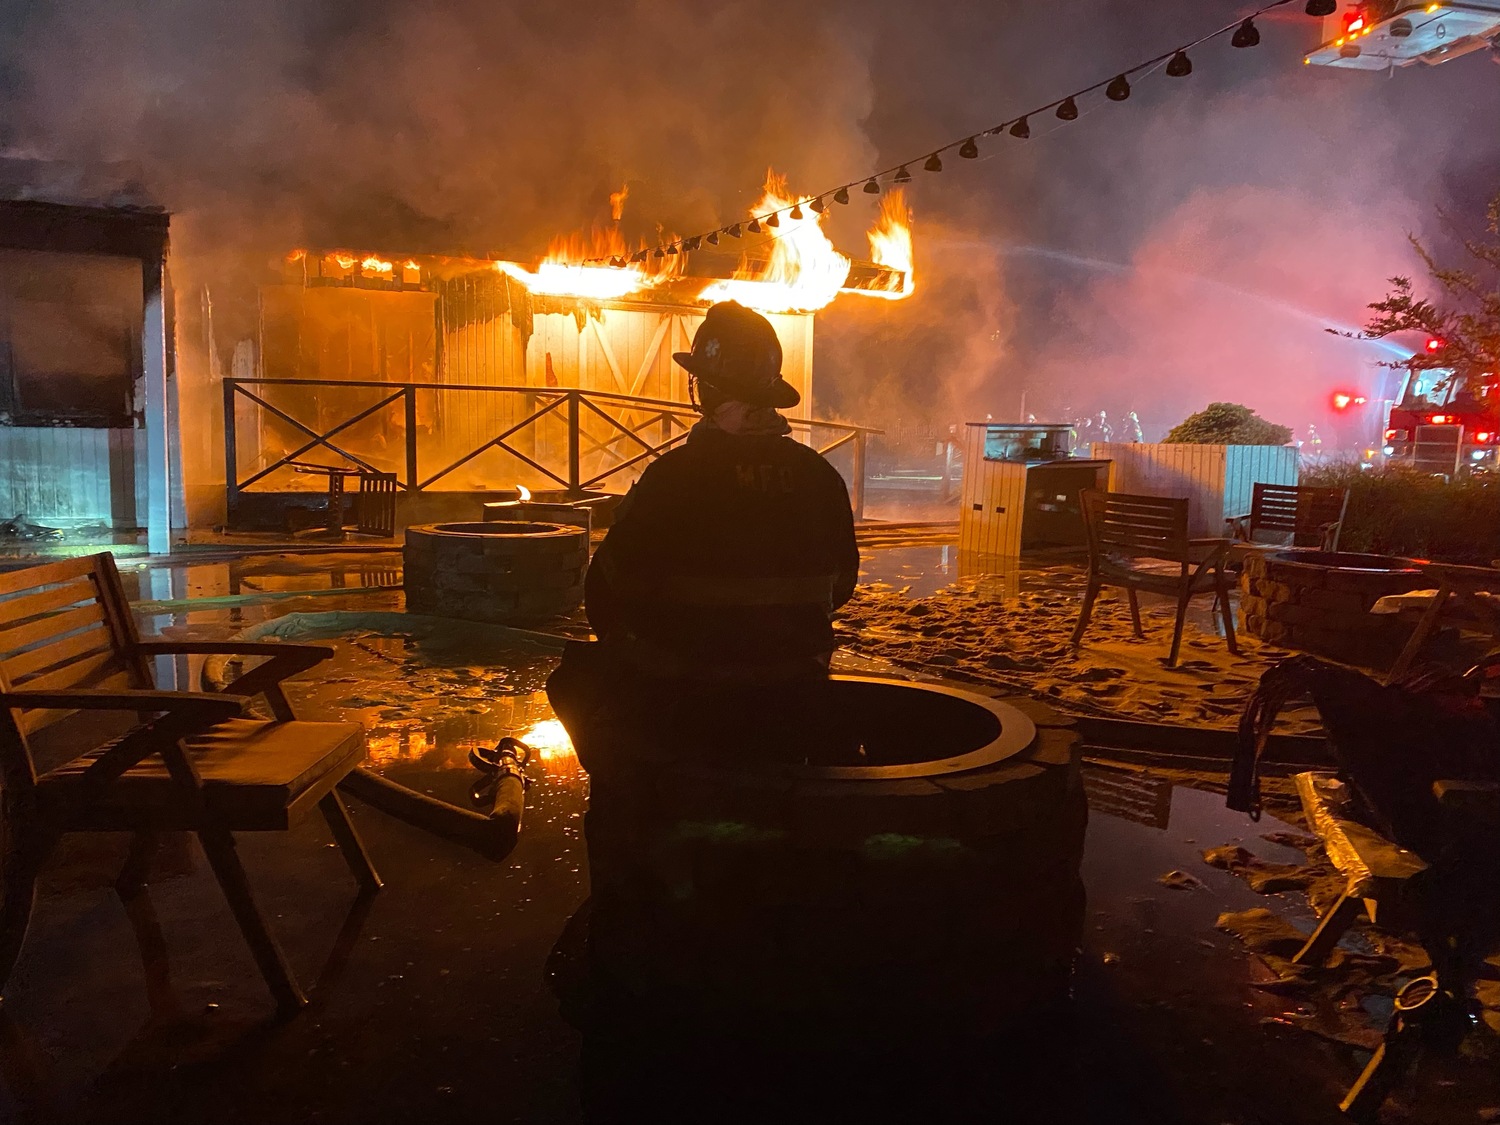  A midnight fire destroyed the barn-like waterfront restaurant building that for years was home to Rick’s Crabby Cowboy Cafe on East Lake Drive in Montauk. COURTESY SCOTT SNOW